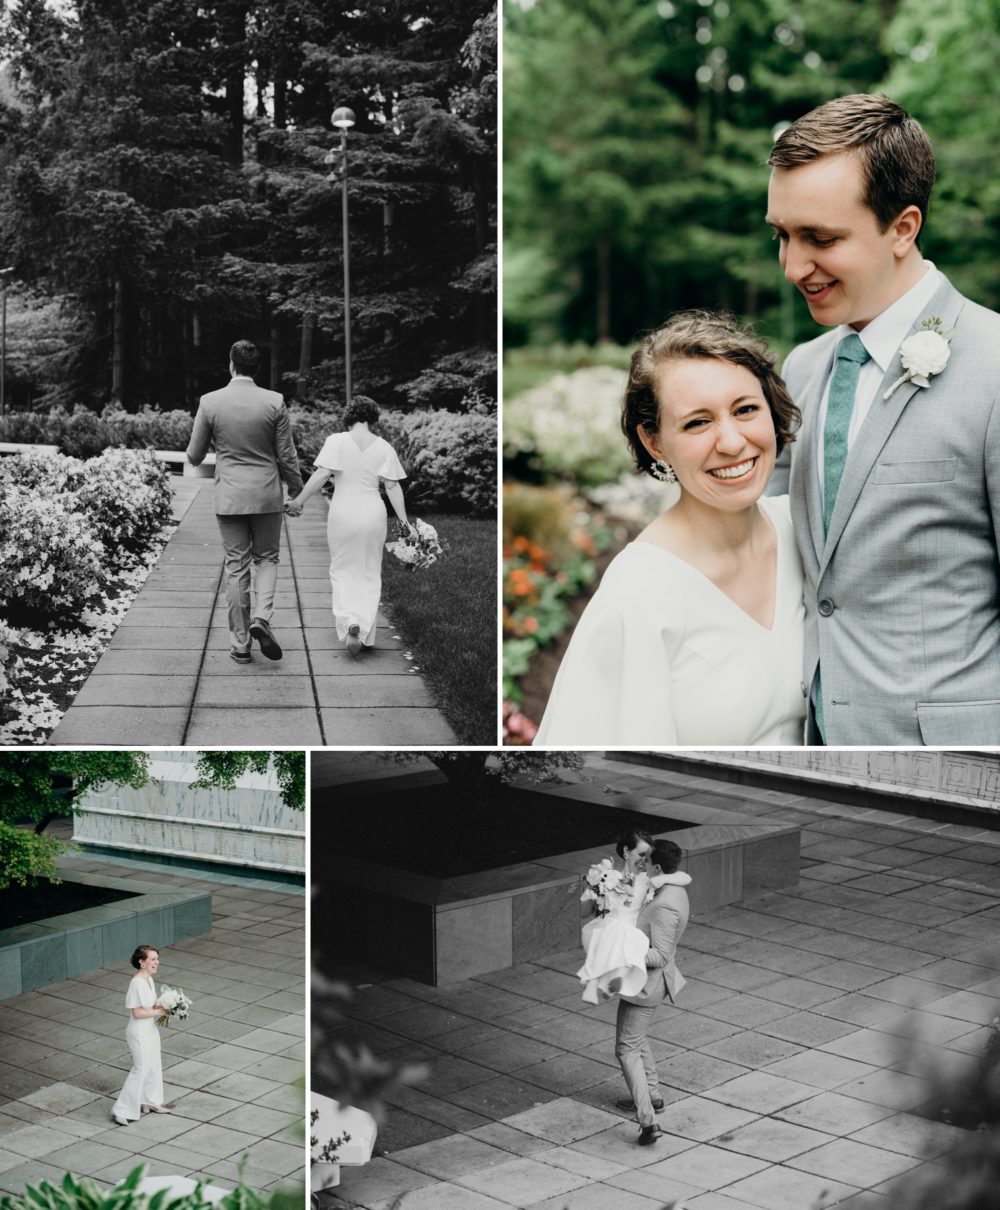 Portraits of the bride and groom at the LDS temple by Portland wedding photographer Briana Morrison